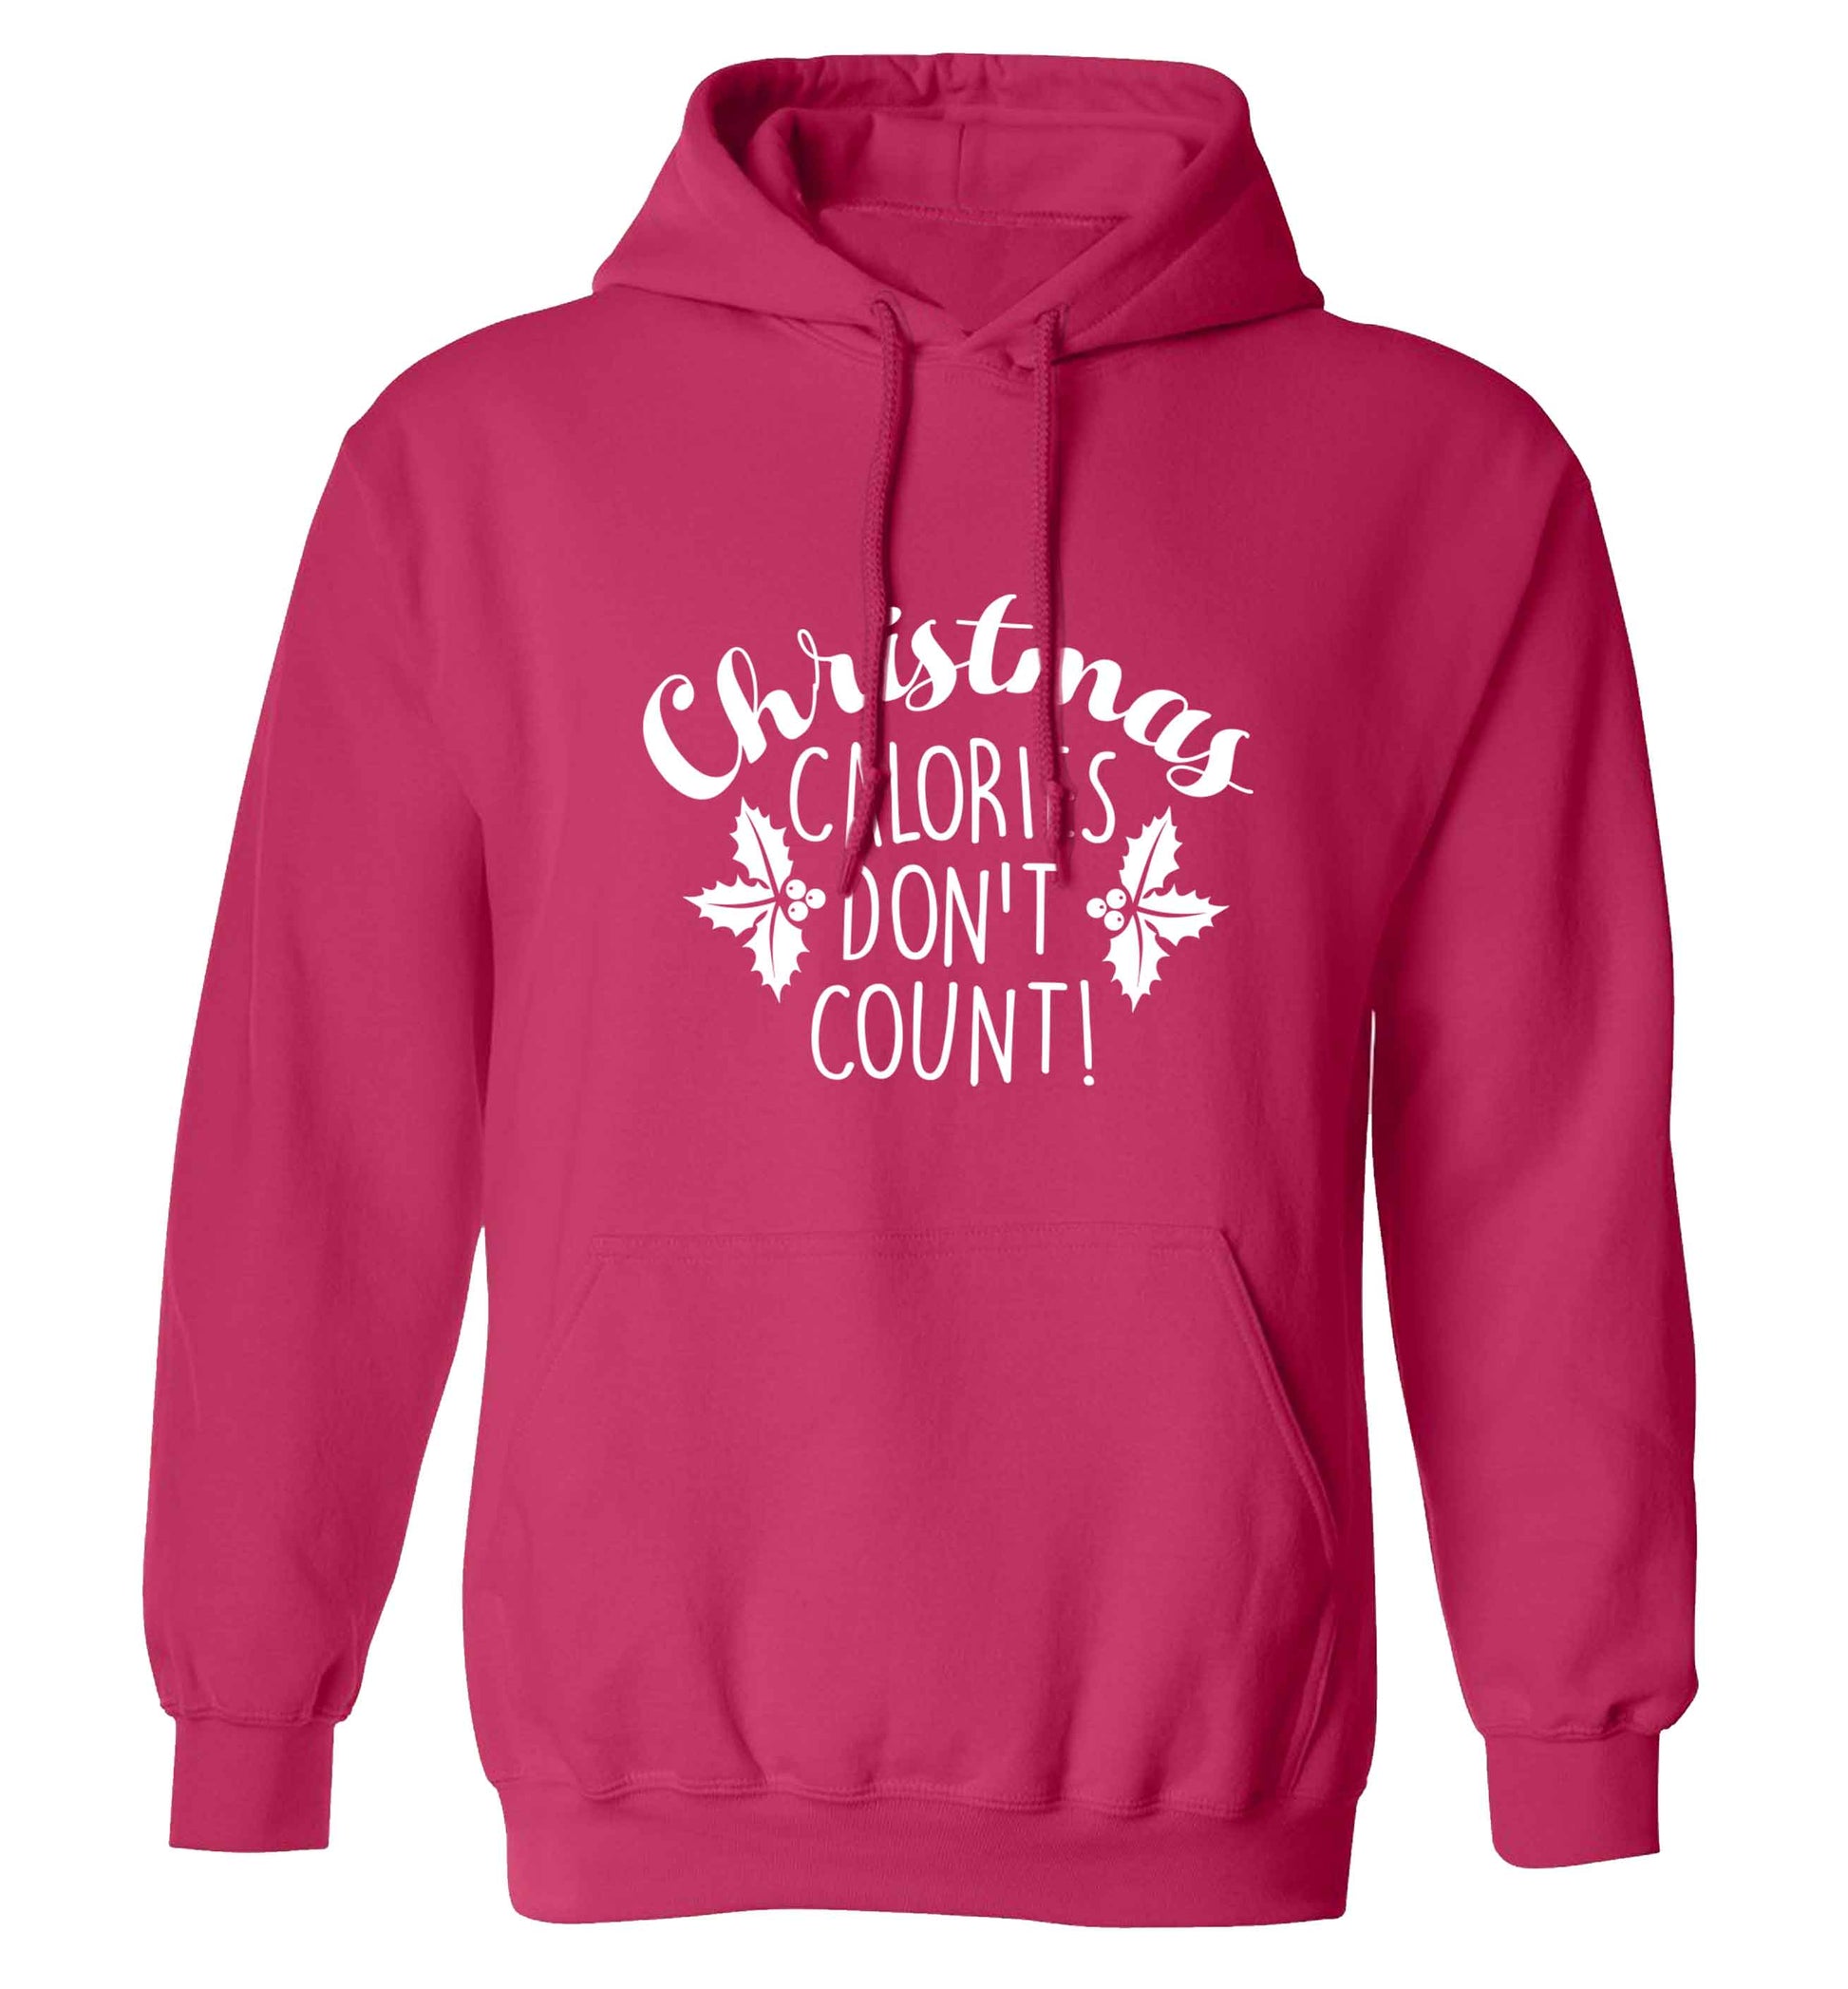 Christmas calories don't count adults unisex pink hoodie 2XL